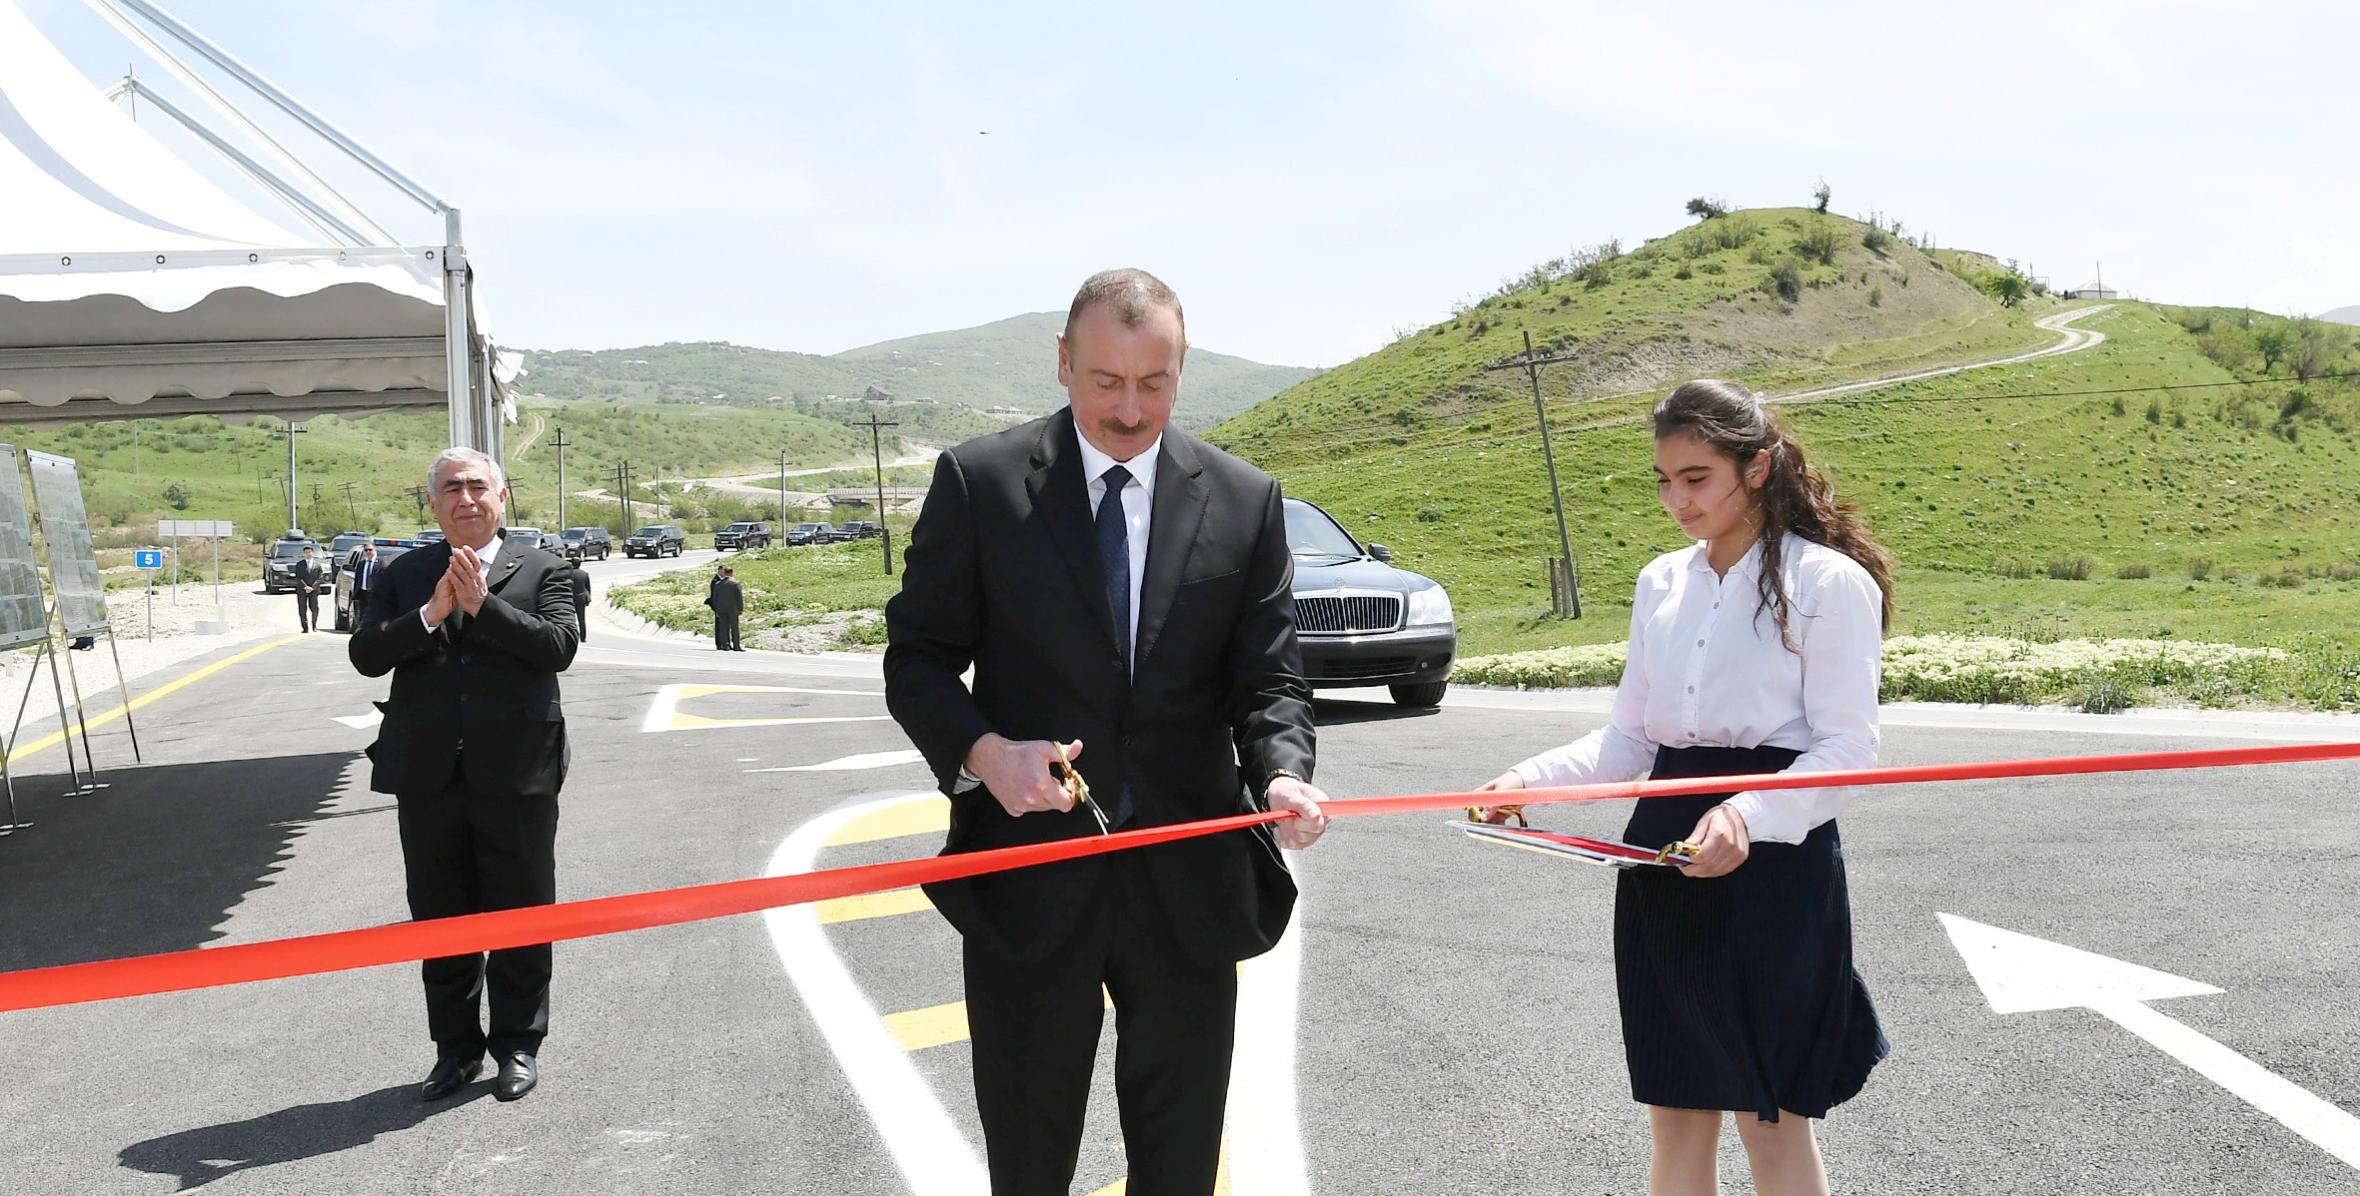 Ilham Aliyev inaugurated the road linking Gilazi-Khizi highway with Findighan village